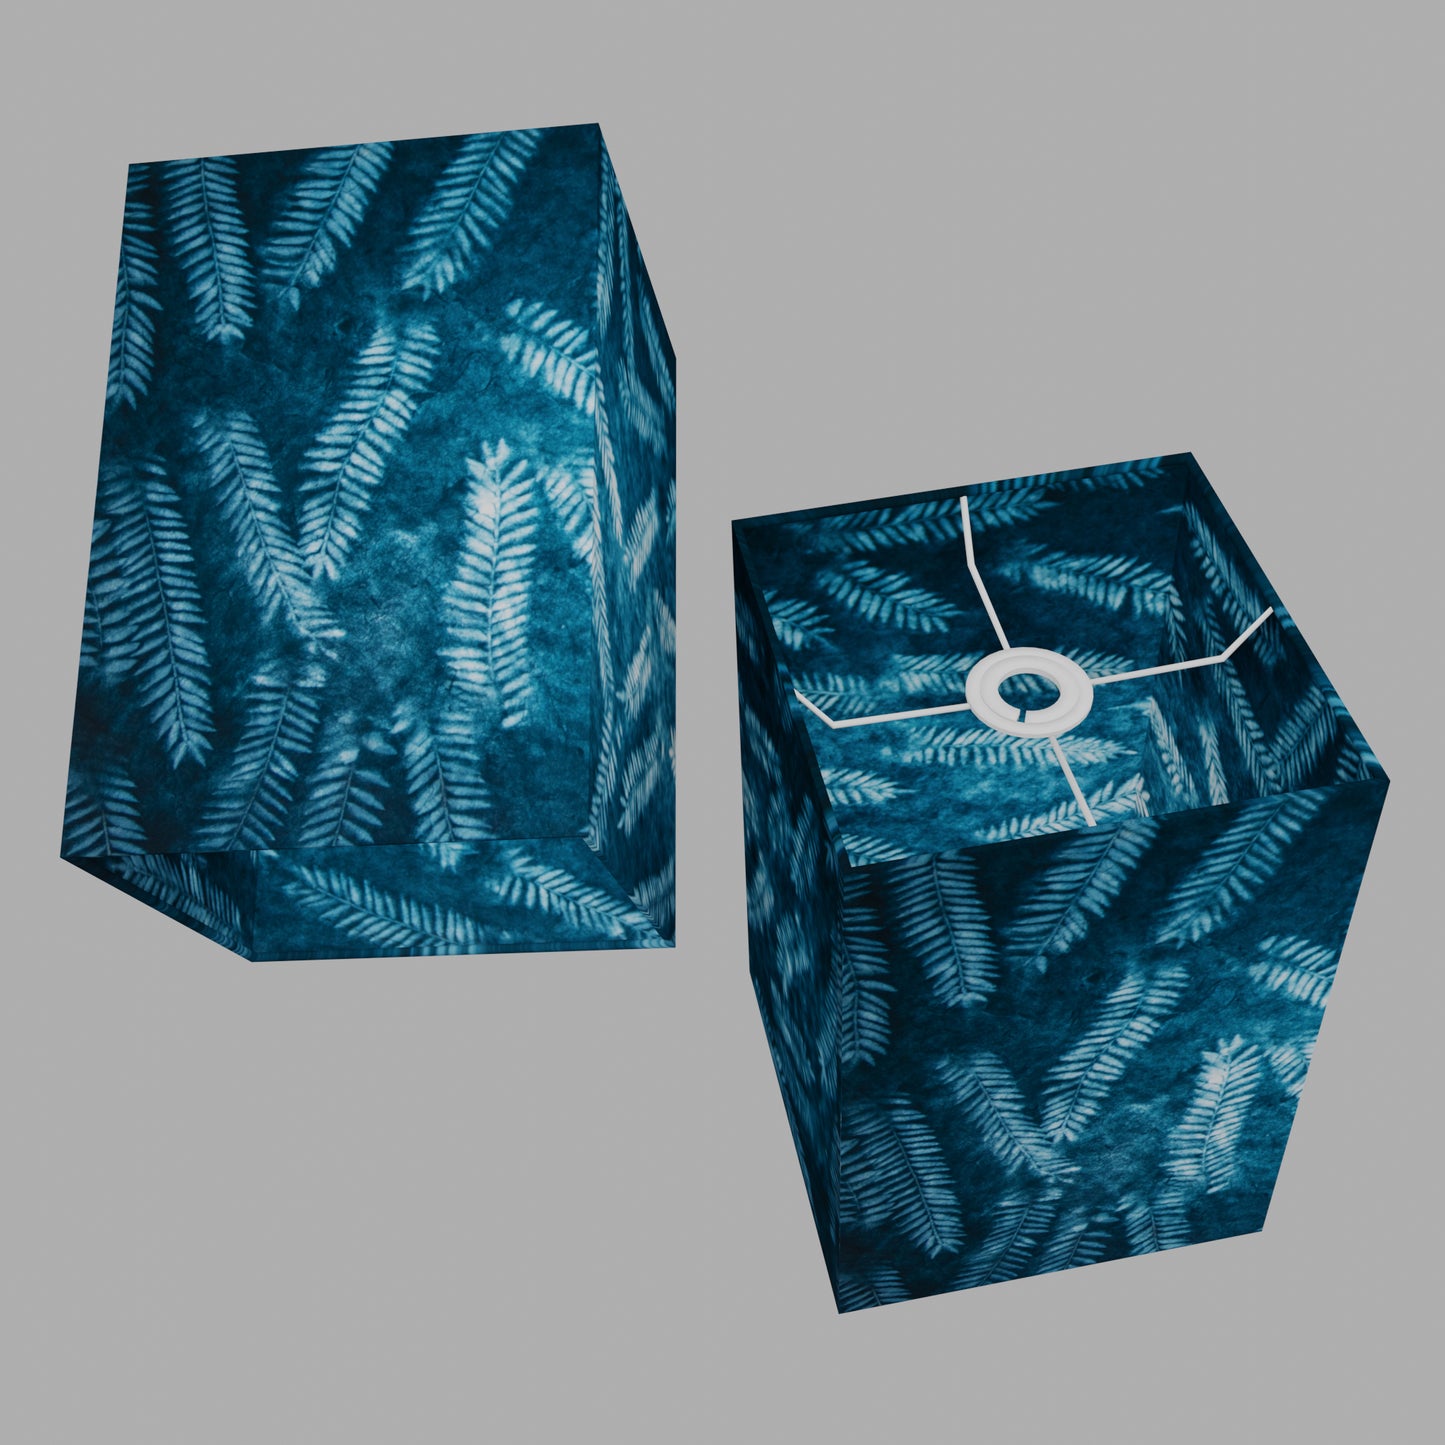 Square Lamp Shade - B106 ~ Resistance Dyed Teal Fern, 20cm(w) x 30cm(h) x 20cm(d)